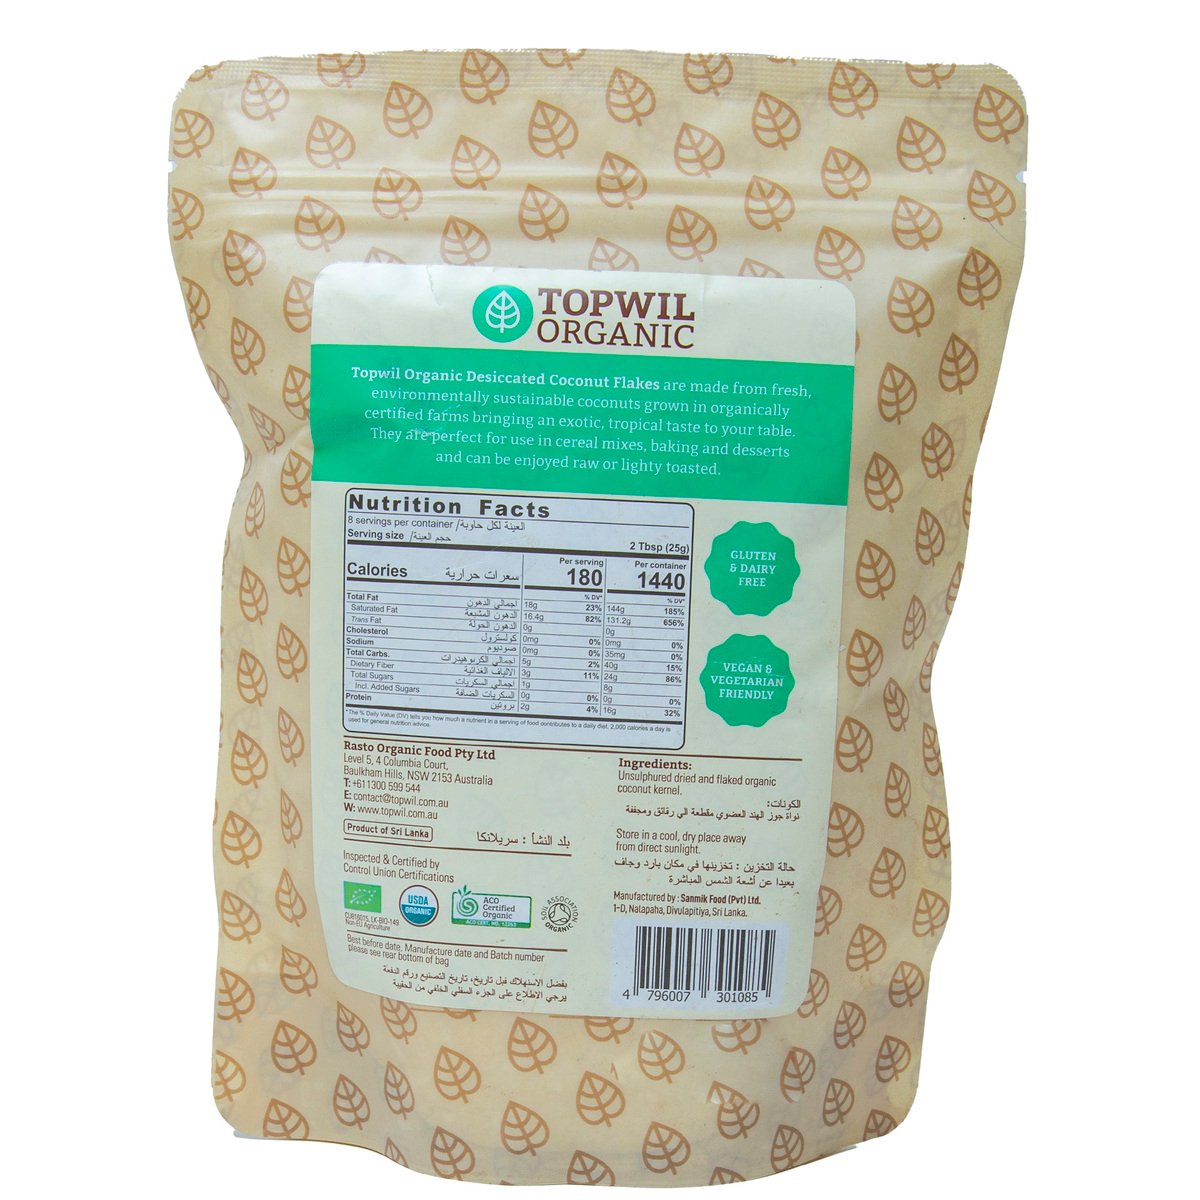 Topwil Organic Desiccated Coconut Flakes 200g